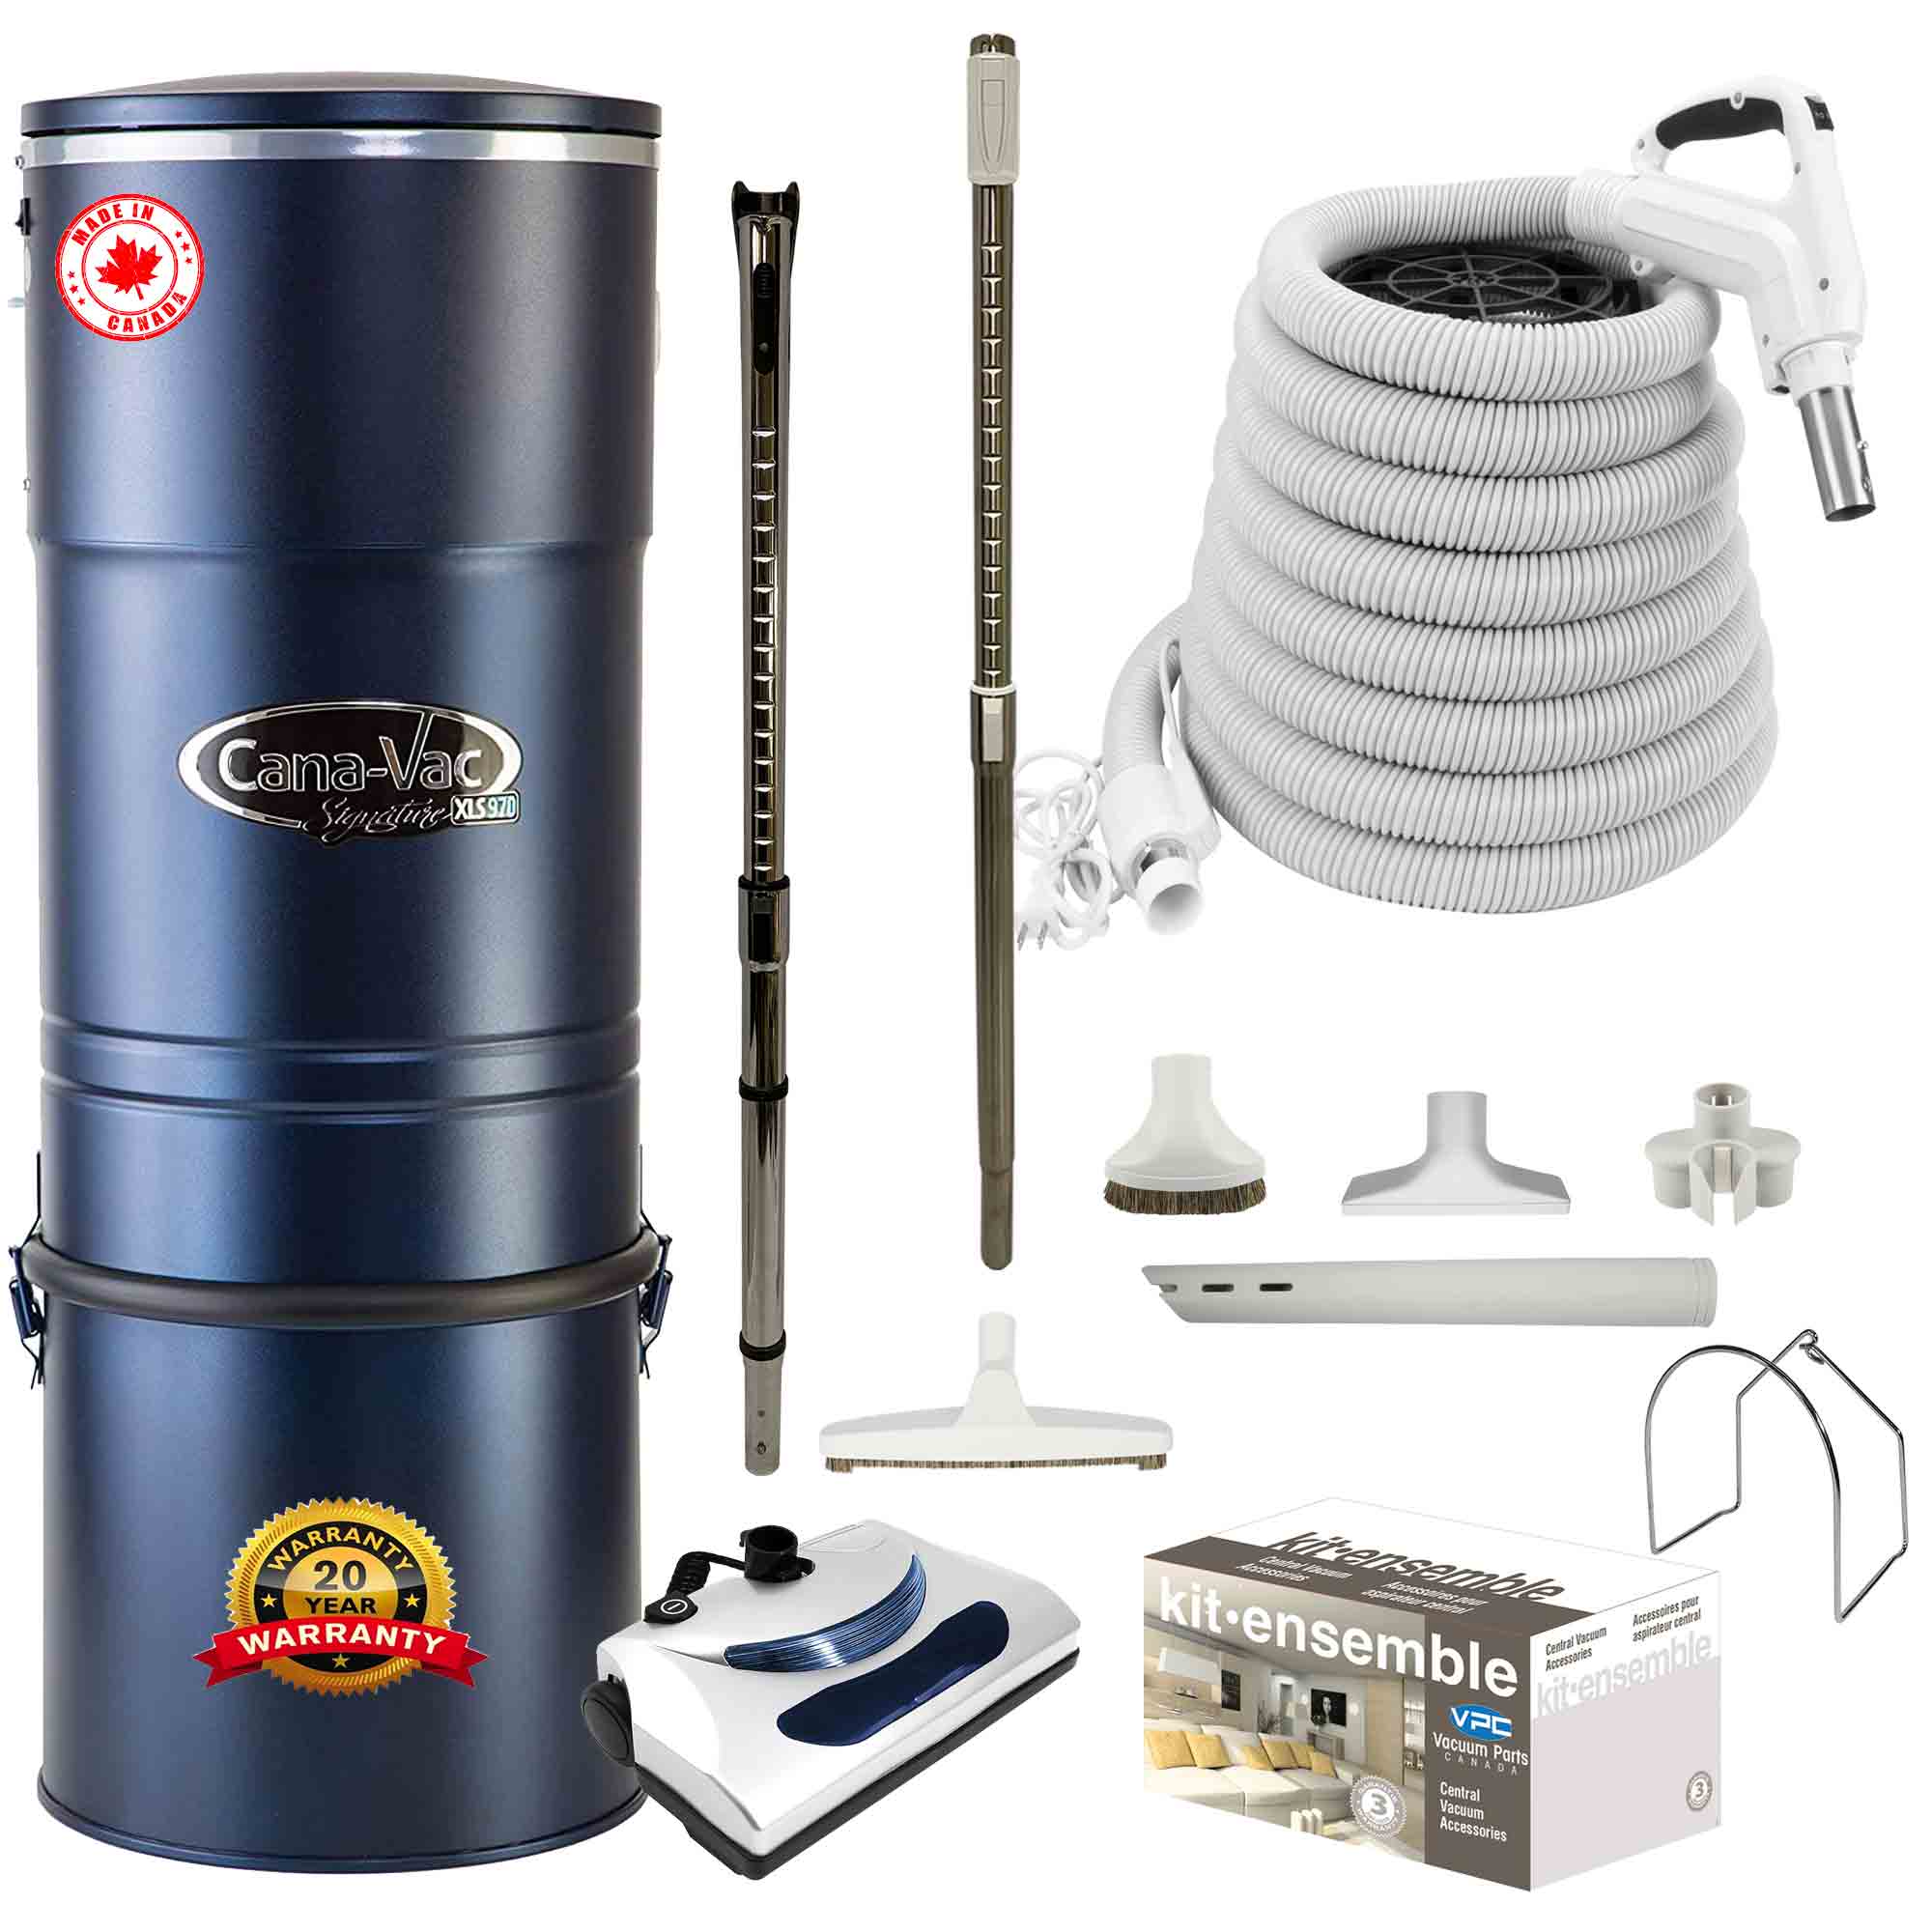 Cana-Vac XLS990 Central Vacuum with Basic Electric Package (White)